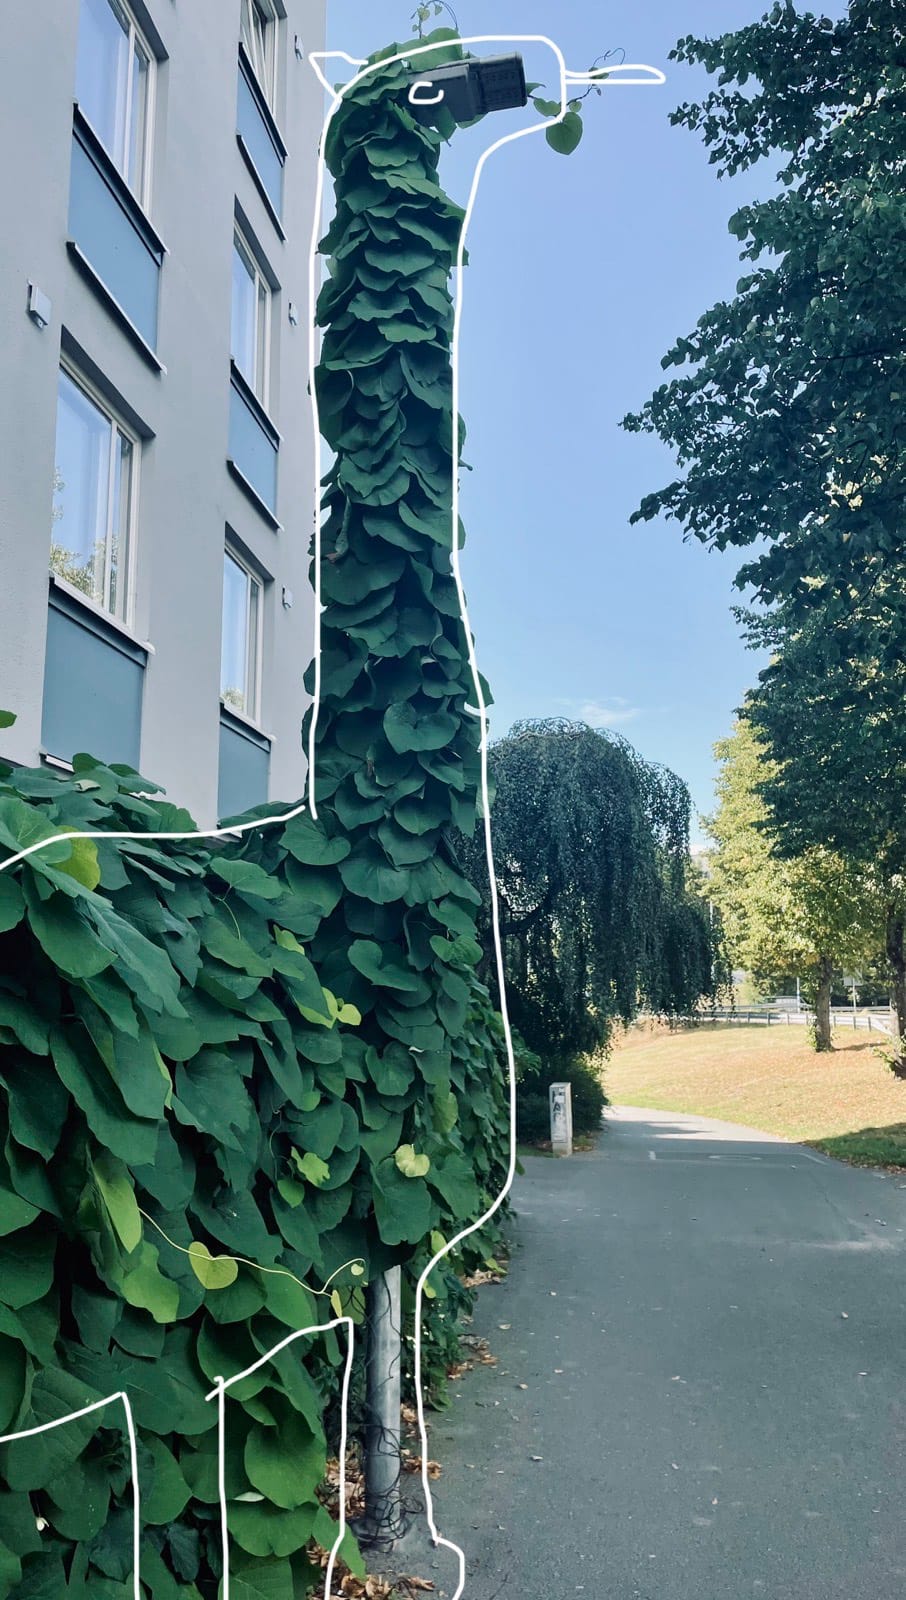 Photo of lamp post entirely wrapped by a climbing vine. With a bit of imagination, it looks like a giraffe or maybe a Brontosaurus. A 36-year-old – but it seems like a 6-year-old – has drawn something resembling a dinosaur on top of the photo.